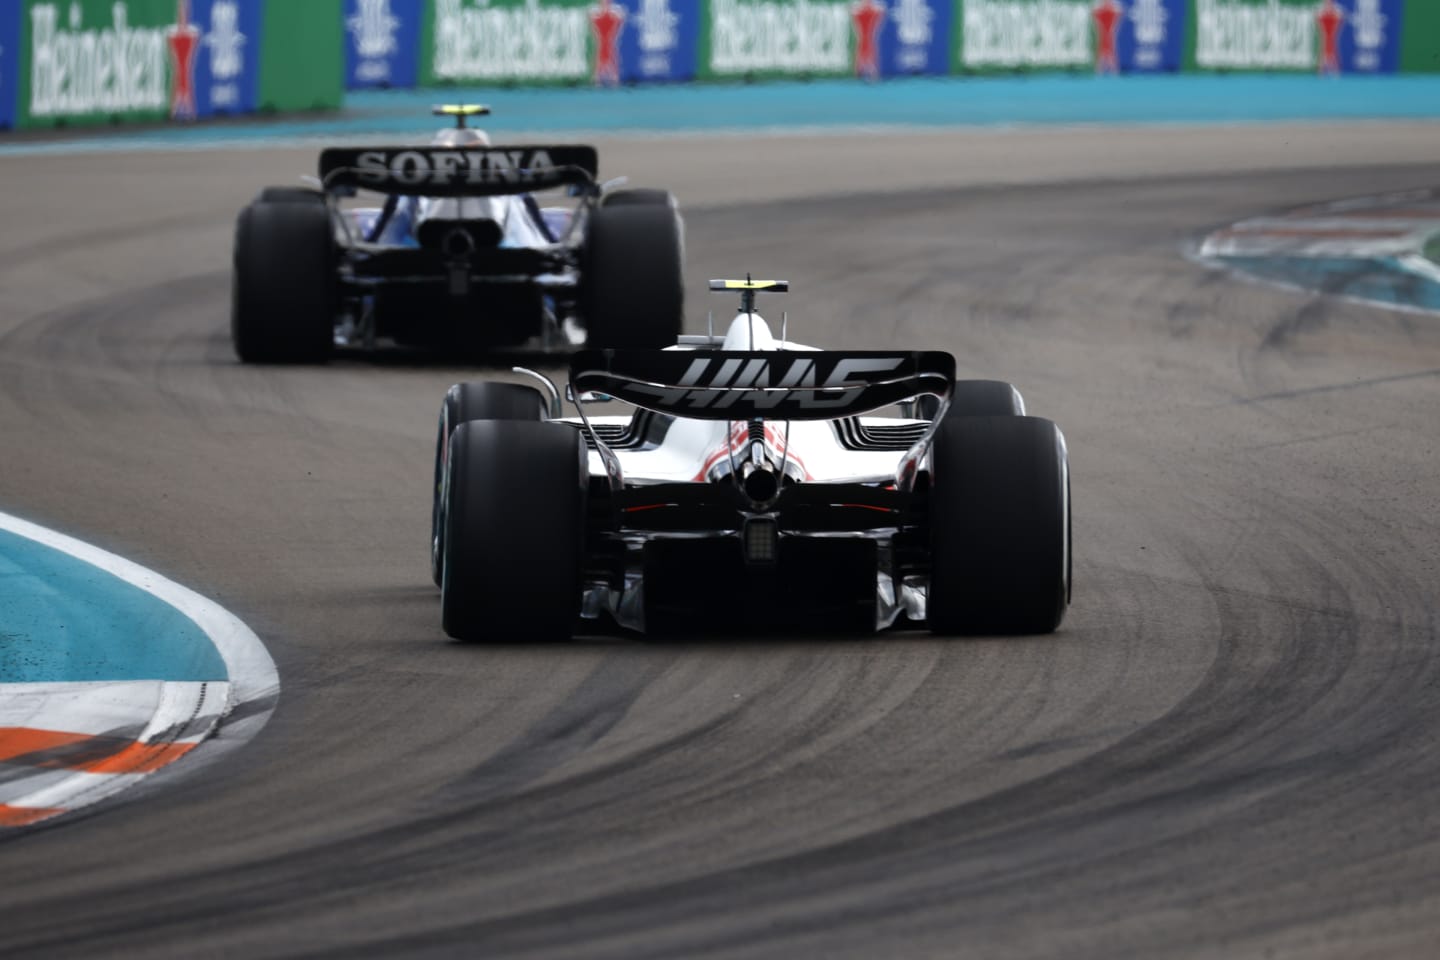 MIAMI, FLORIDA - MAY 08: Mick Schumacher of Germany driving the (47) Haas F1 VF-22 Ferrari follows Nicholas Latifi of Canada driving the (6) Williams FW44 Mercedes during the F1 Grand Prix of Miami at the Miami International Autodrome on May 08, 2022 in Miami, Florida. (Photo by Jared C. Tilton/Getty Images)